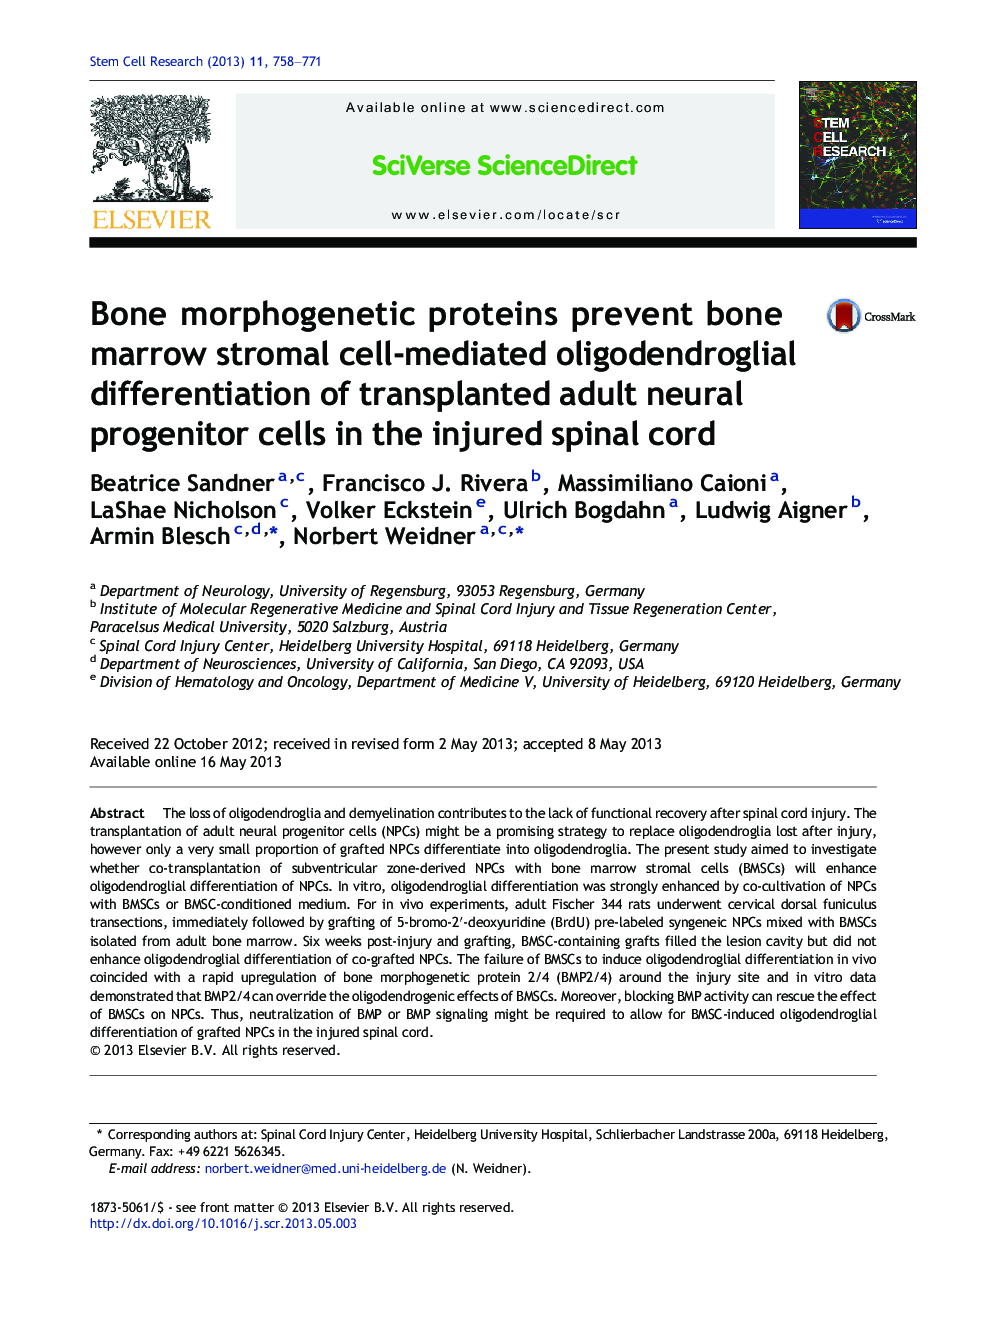 Bone morphogenetic proteins prevent bone marrow stromal cell-mediated oligodendroglial differentiation of transplanted adult neural progenitor cells in the injured spinal cord